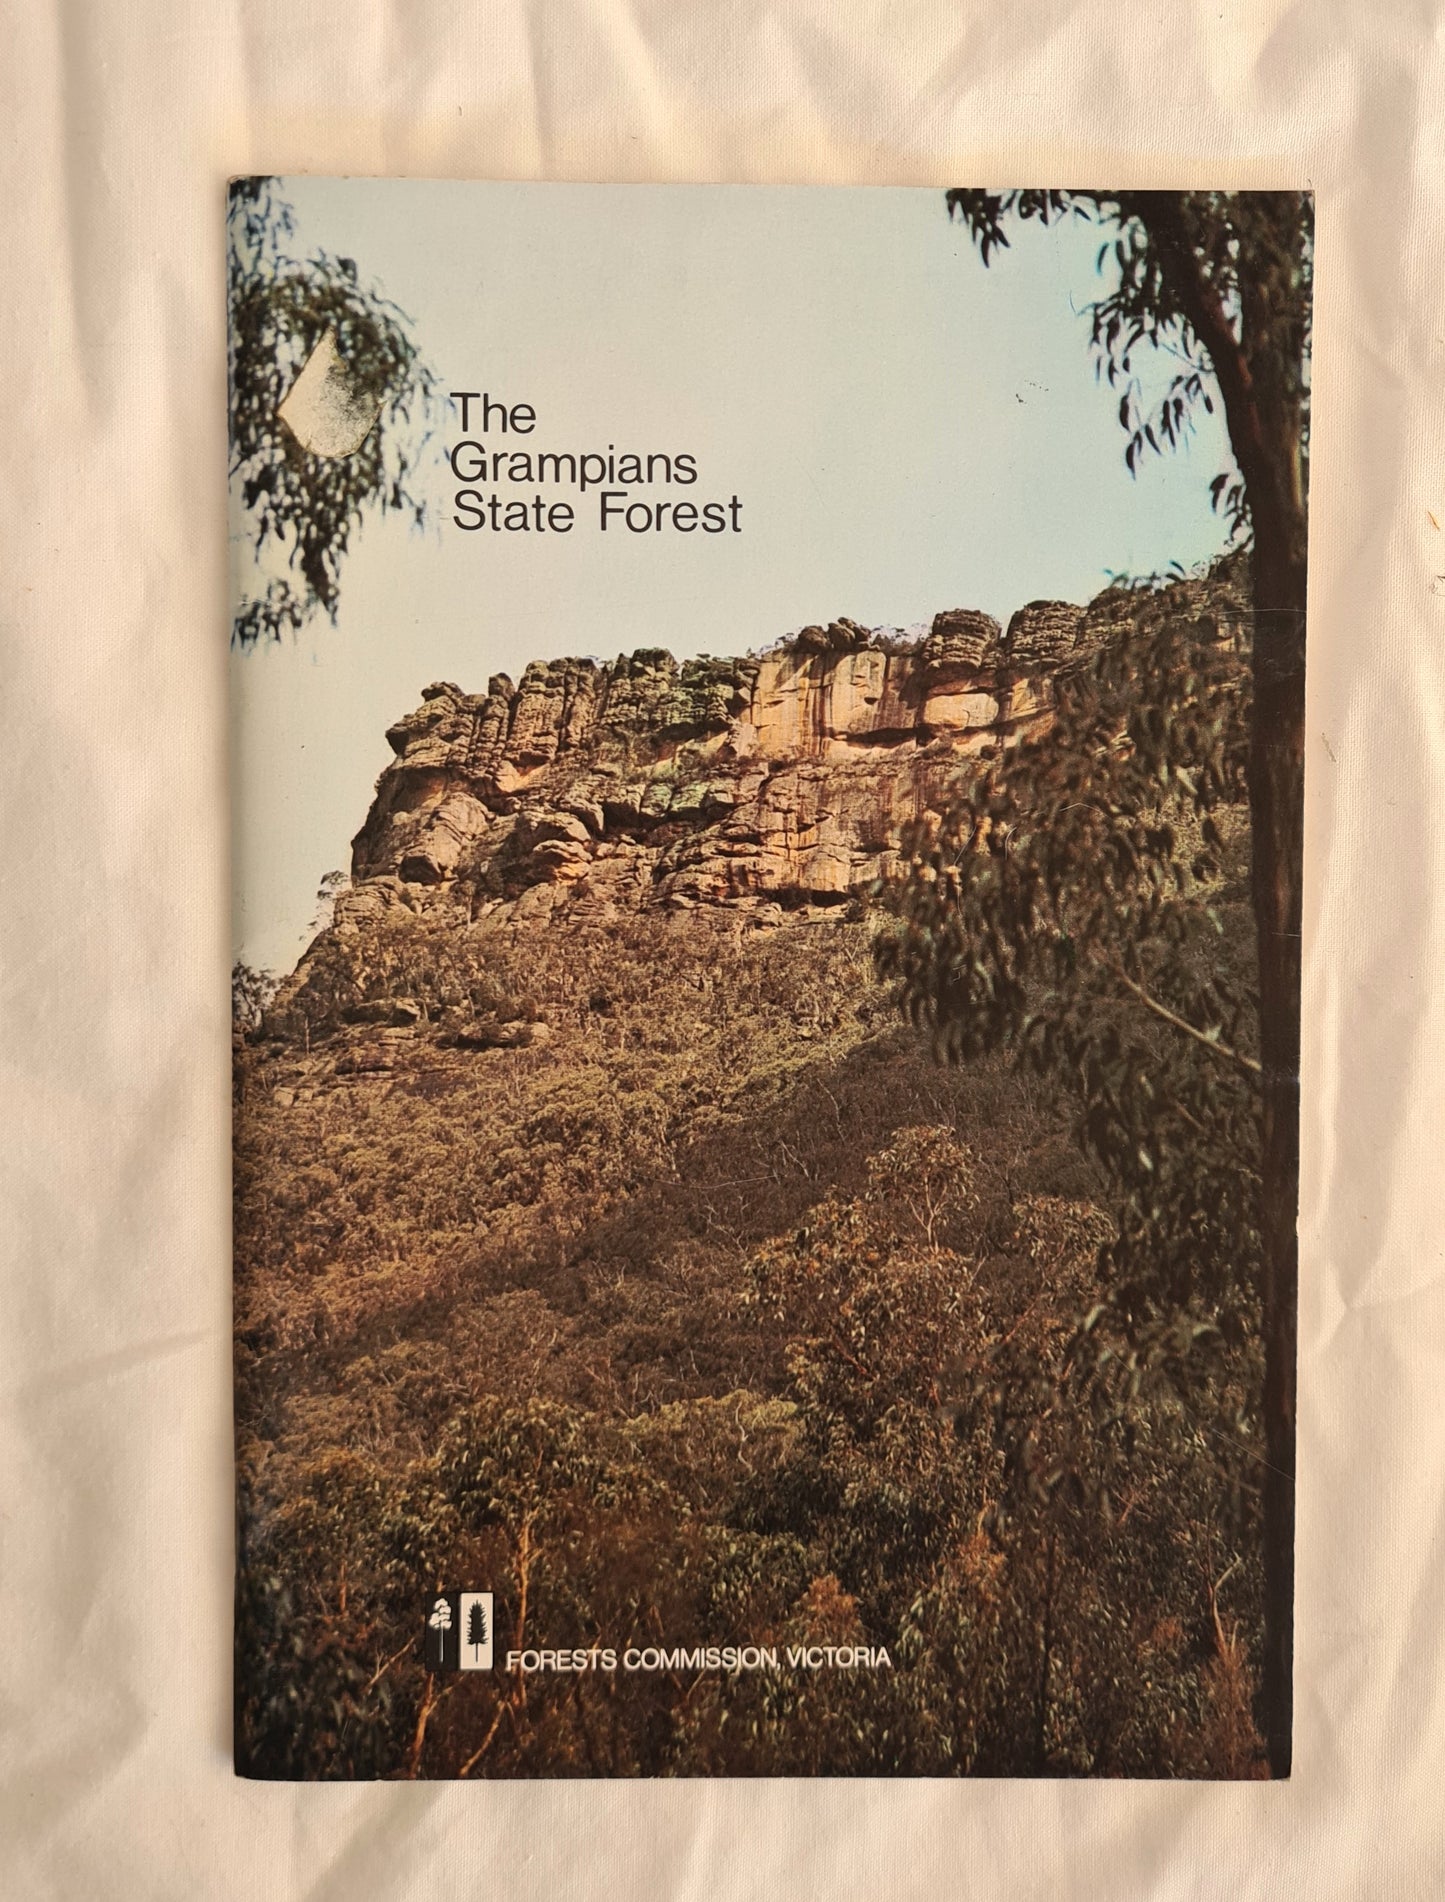 The Grampians State Forest  Forests Commission Victoria, no date, staple-bound paperback booklet